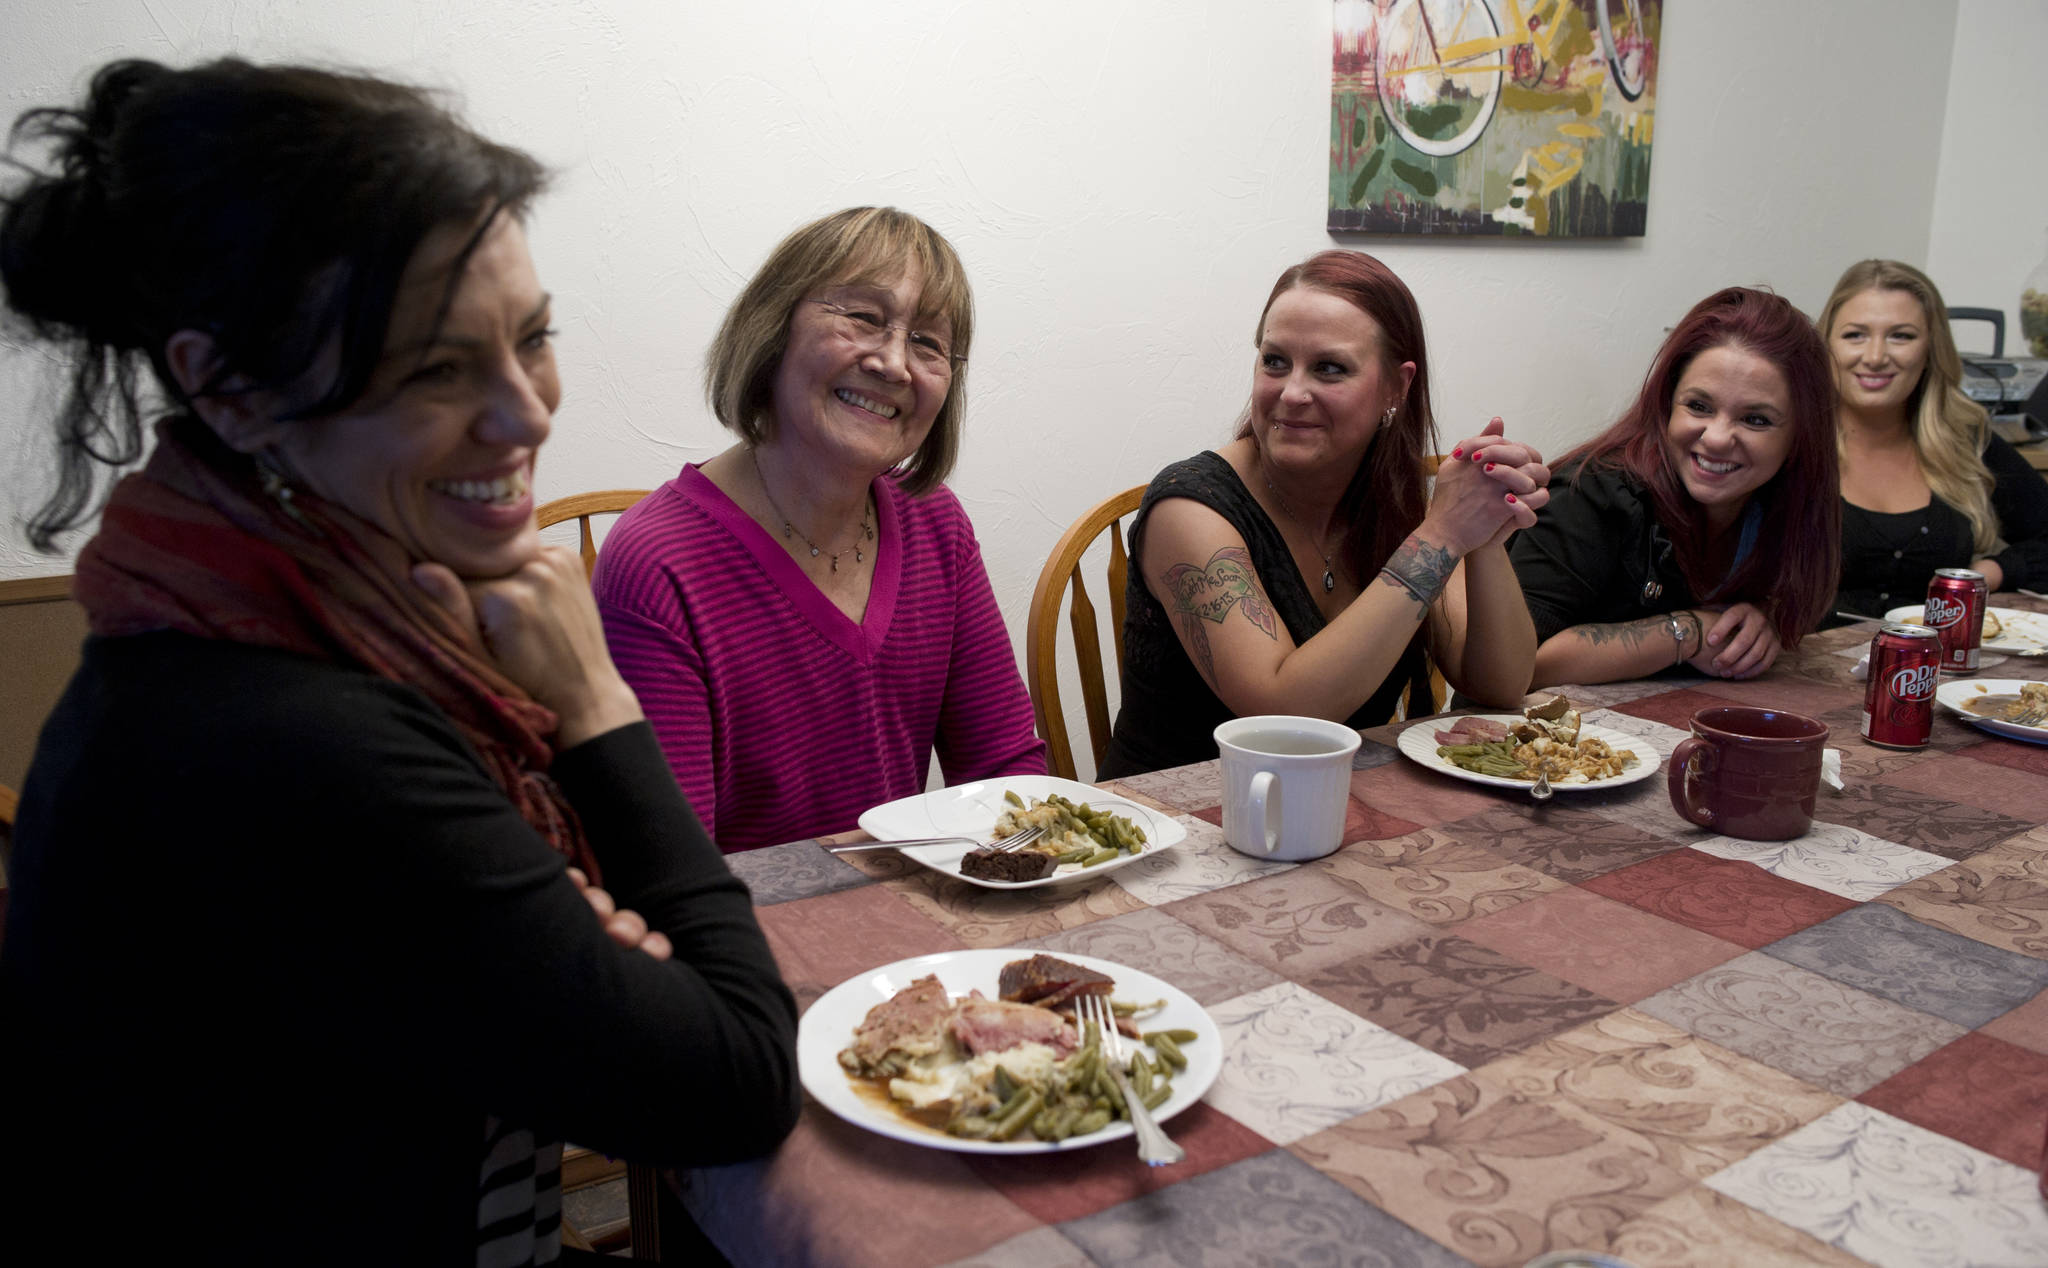 In this March 2016 photo, Director Kara Nelson, left, and Board Chair June Degnan, second from left, share in a group dinner with residents Andrea Robinson, center, Samantha Garton and Brandi Vrabec, right, at Haven House on Tuesday. Haven House is celebrating their one year annversary as a transitional home for recently released female prisoners or women coming out of substance abuse treatment. (Michael Penn | Juneau Empire File)